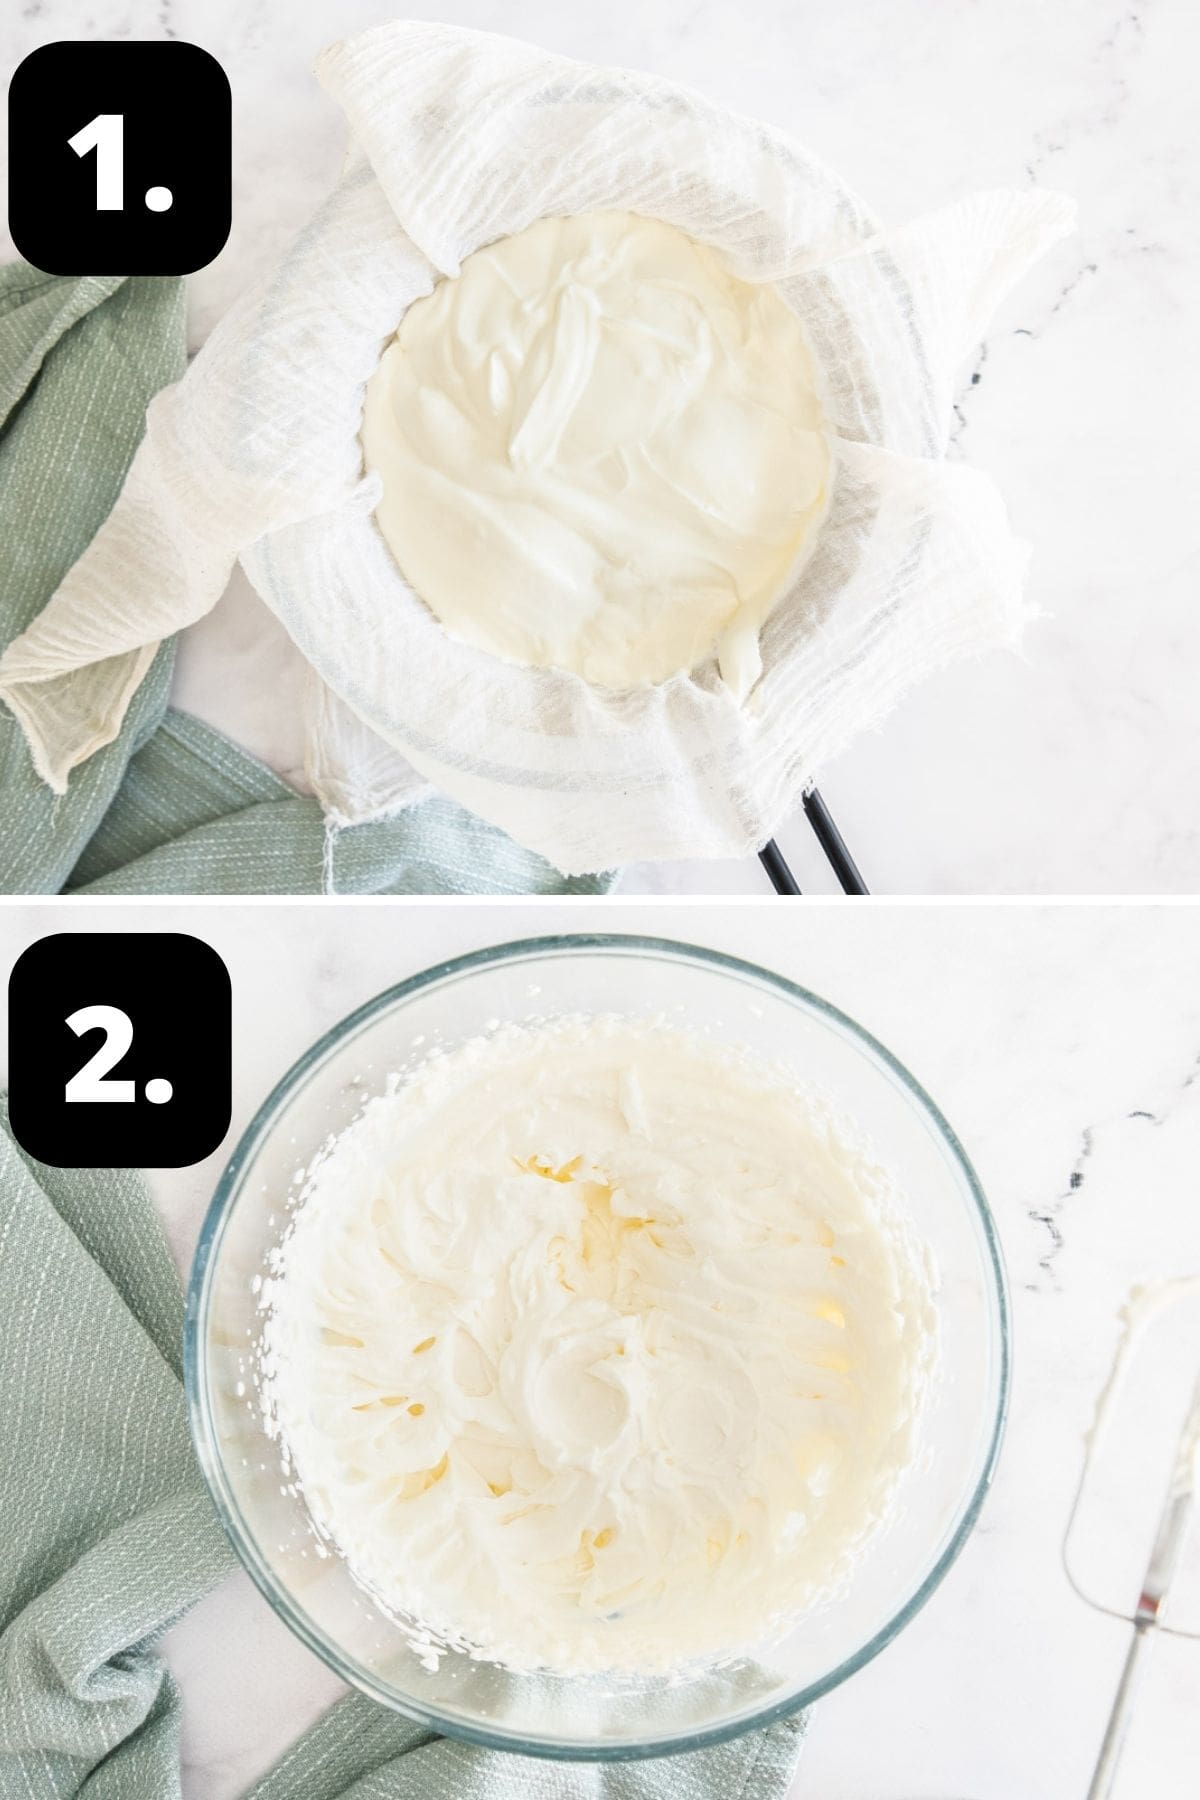 Steps 1-2 of preparing this recipe: straining the yoghurt in cheesecloth and the whipped cream in a separate bowl.